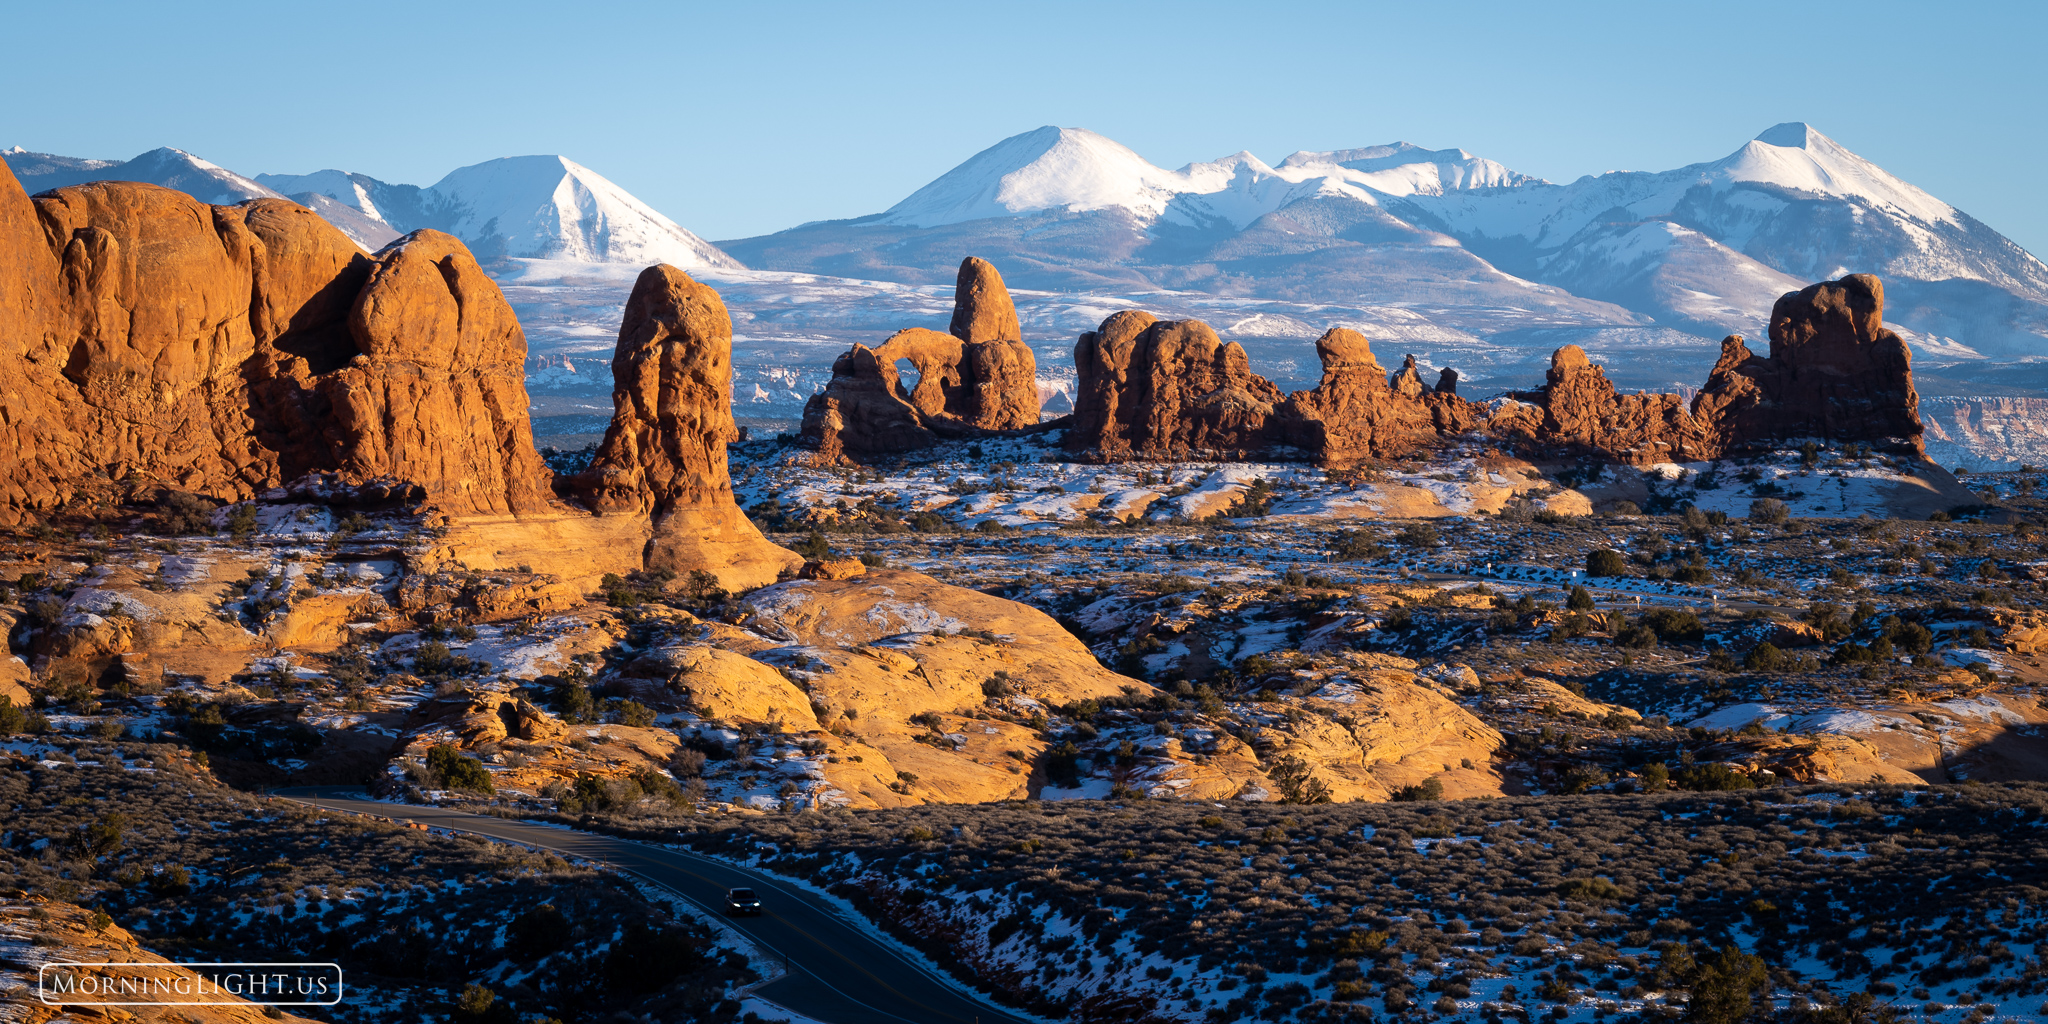 A chilly winter sunset in Arches National Park with the La Sal Mountains in the background.